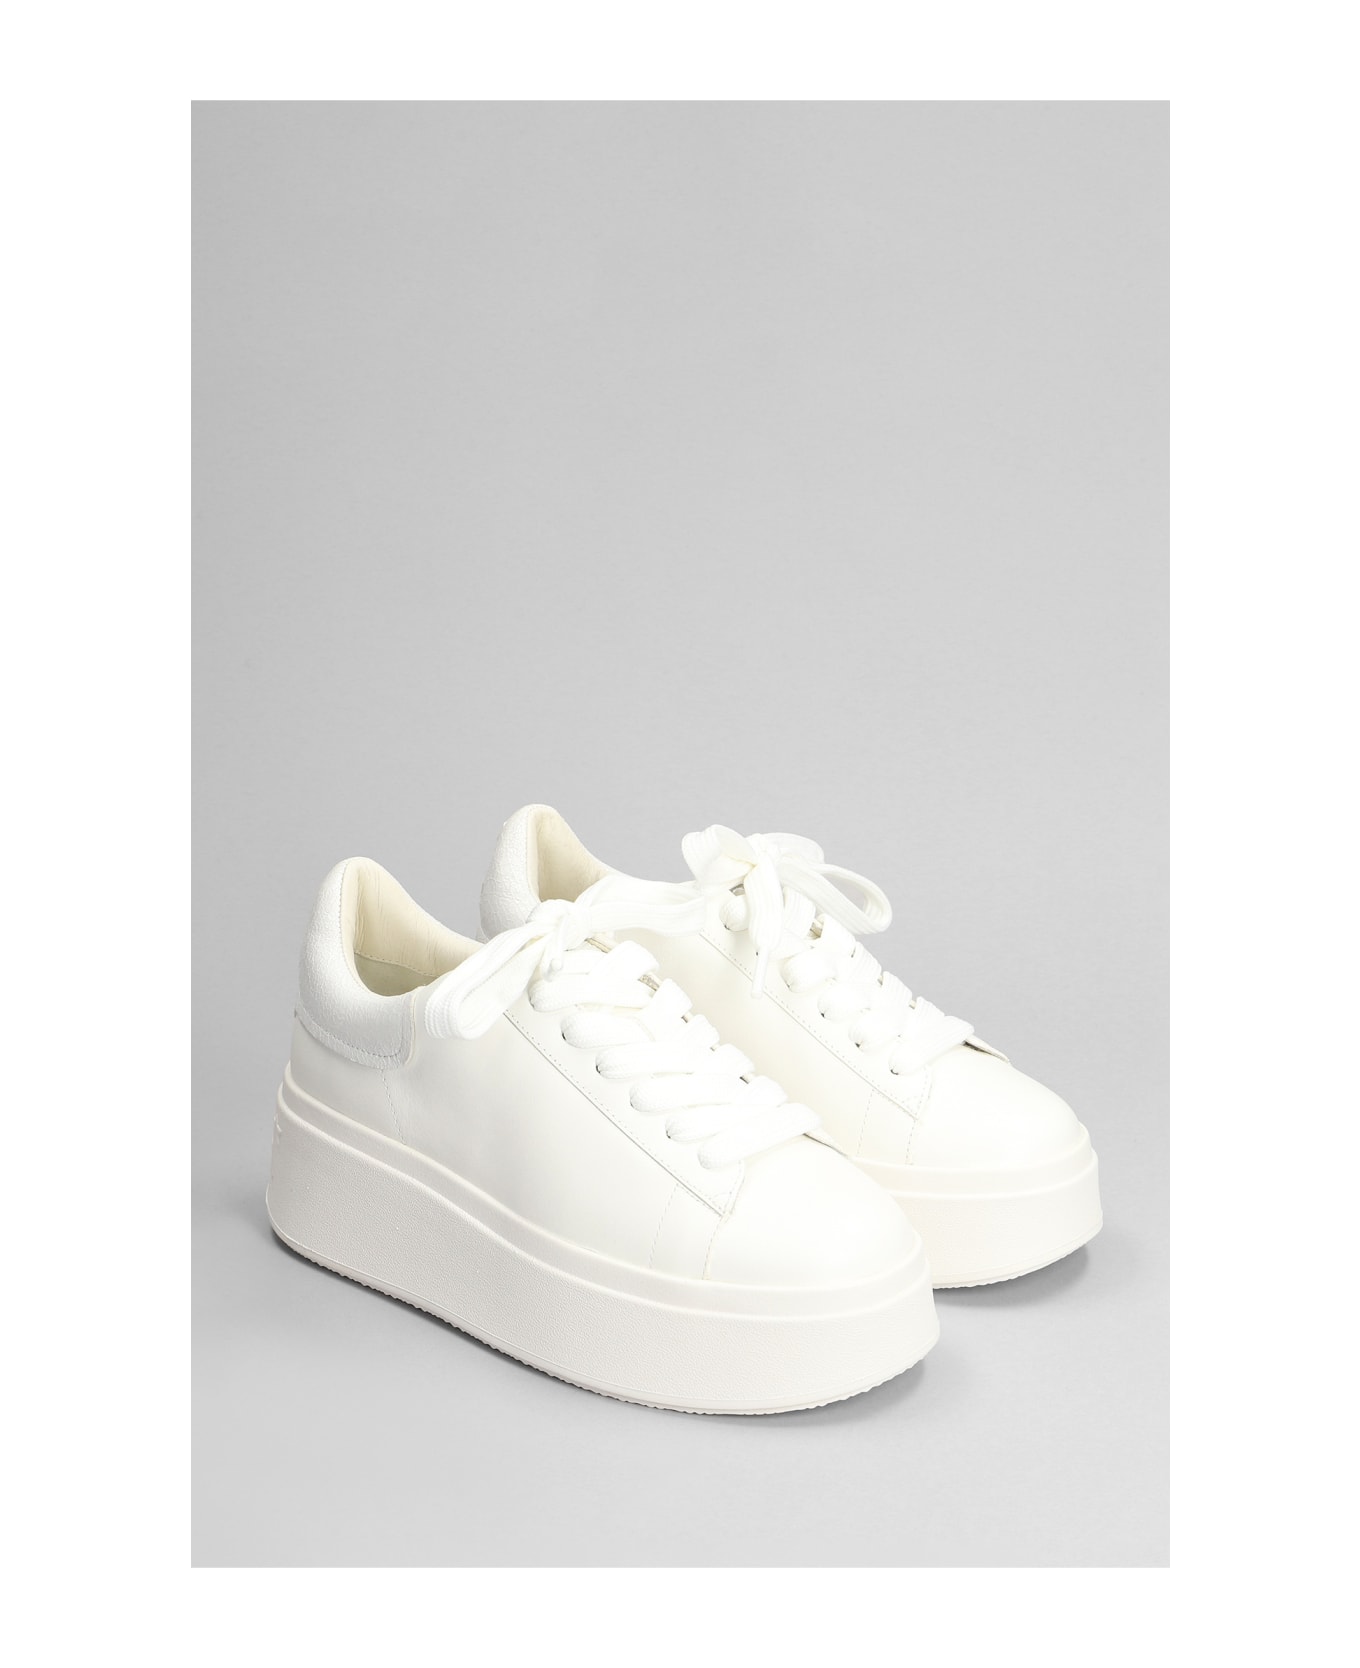 Ash Moby Bekind Sneakers In White Leather - white ウェッジシューズ